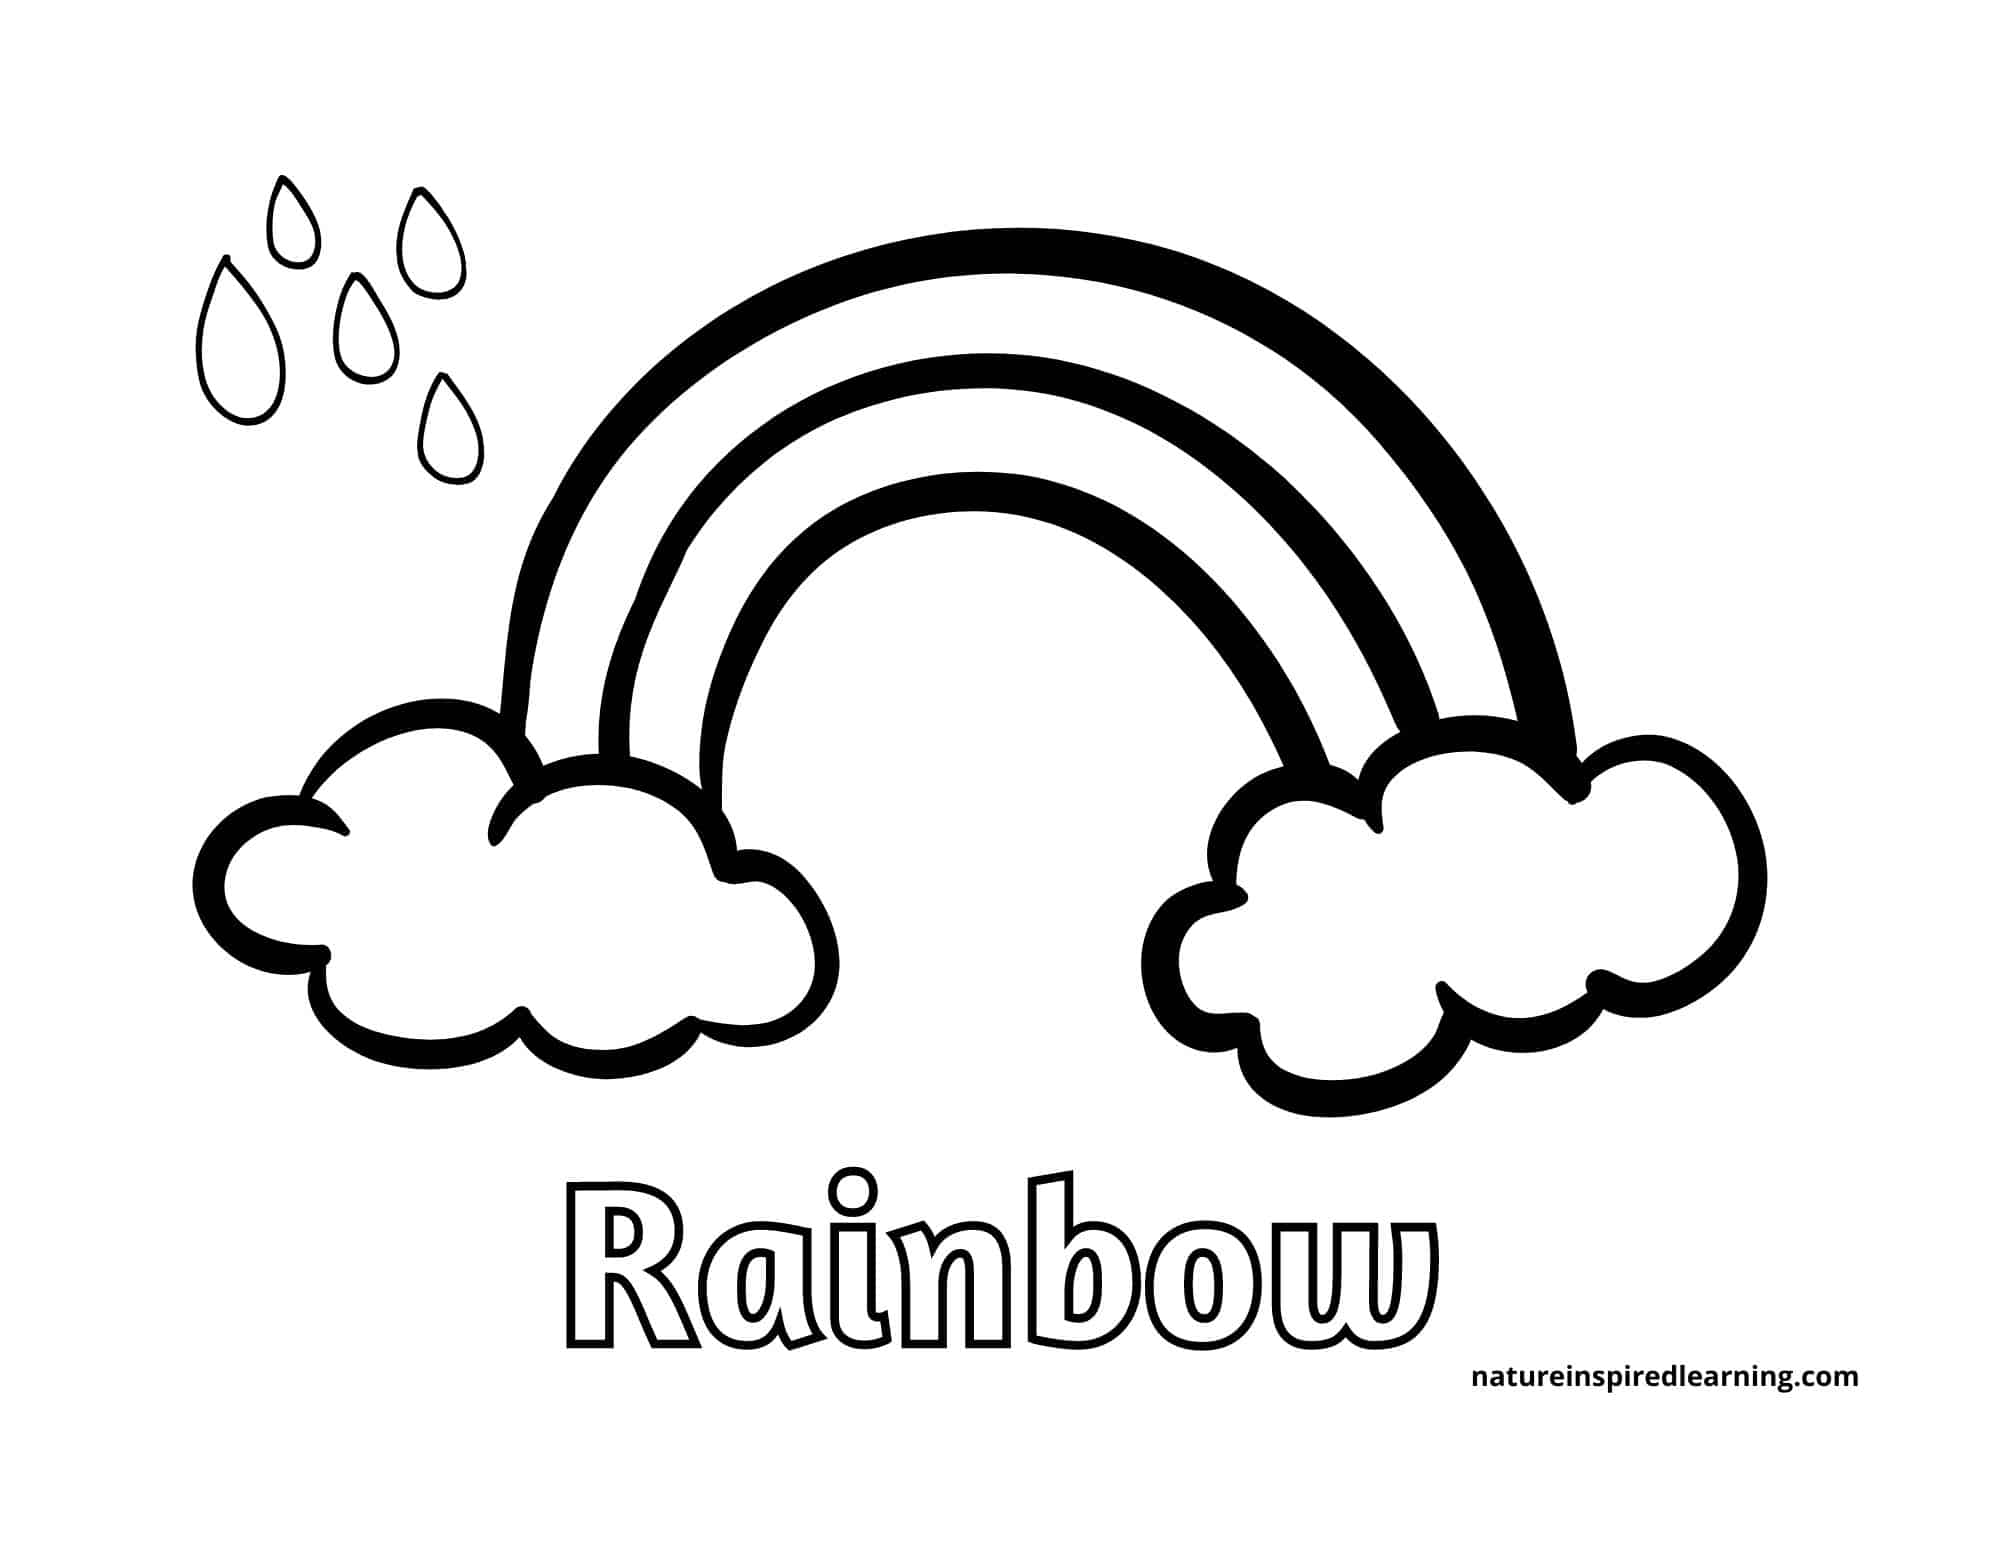 Printable Rainbow Coloring Pages for Kids - Nature Inspired Learning